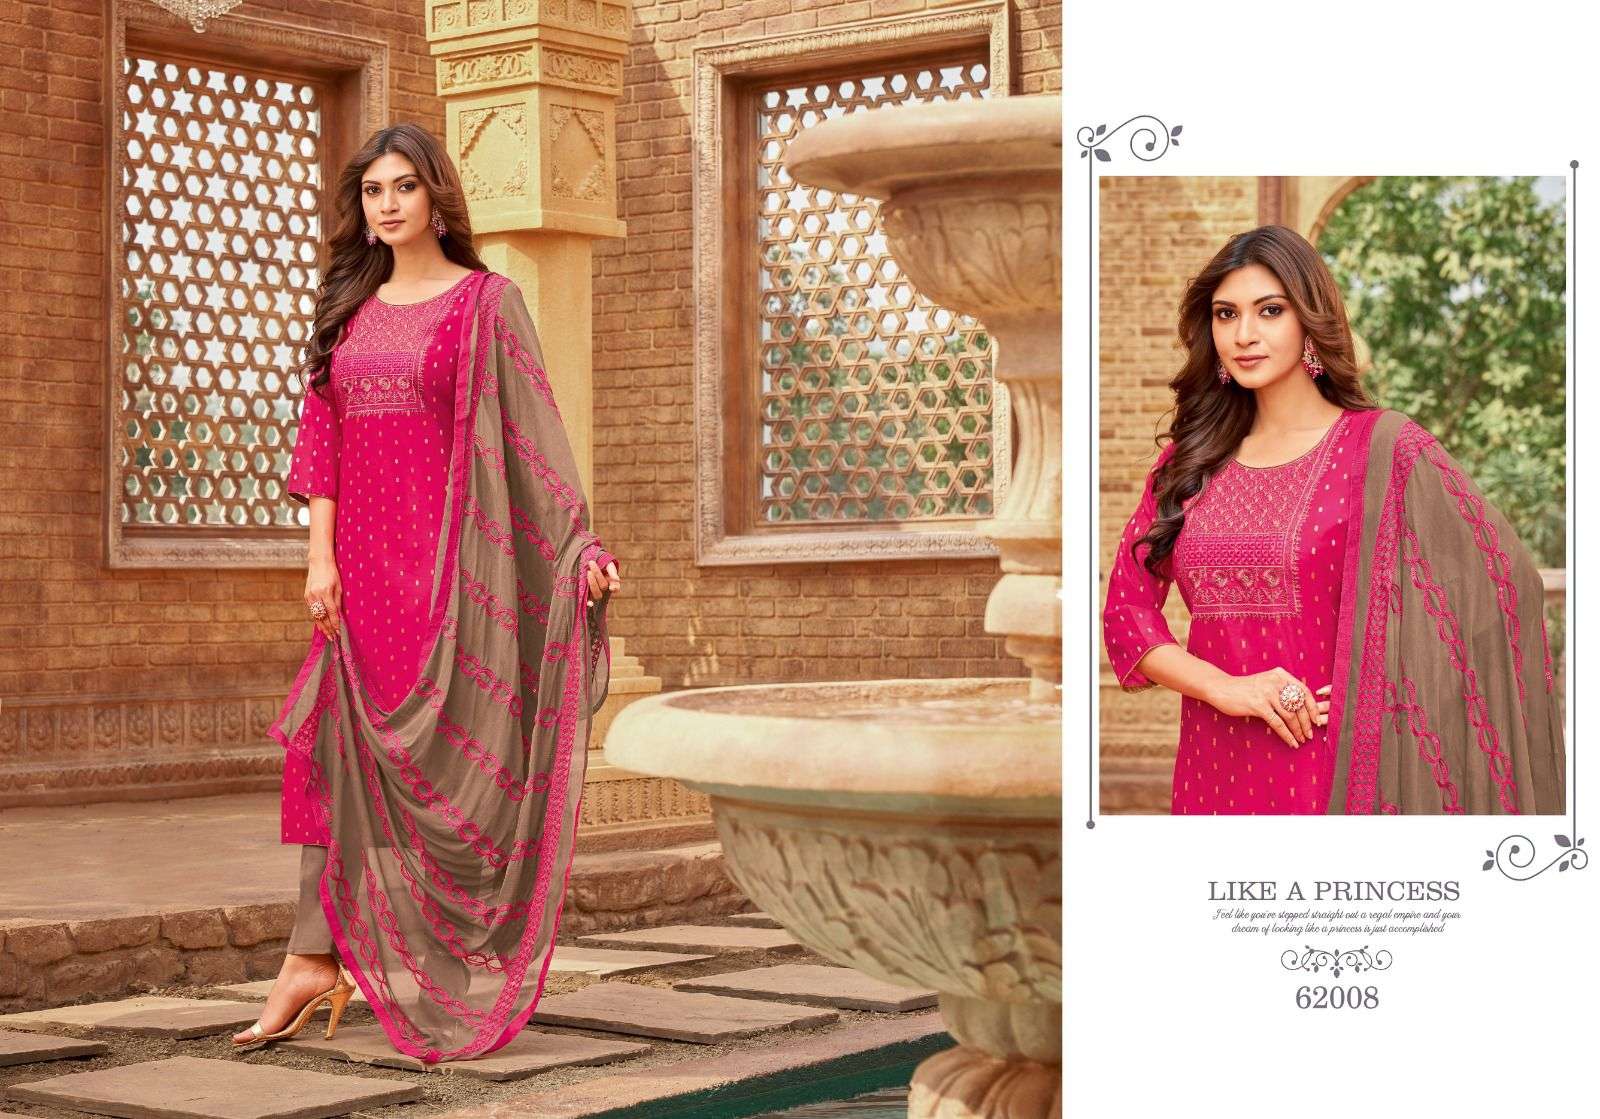 MAIRIN VOL-9 BY KAPIL TRENDZ 62001 TO 62010 SERIES BEAUTIFUL STYLISH SUITS FANCY COLORFUL CASUAL WEAR & ETHNIC WEAR & READY TO WEAR CHANDERI WITH WORK DRESSES AT WHOLESALE PRICE